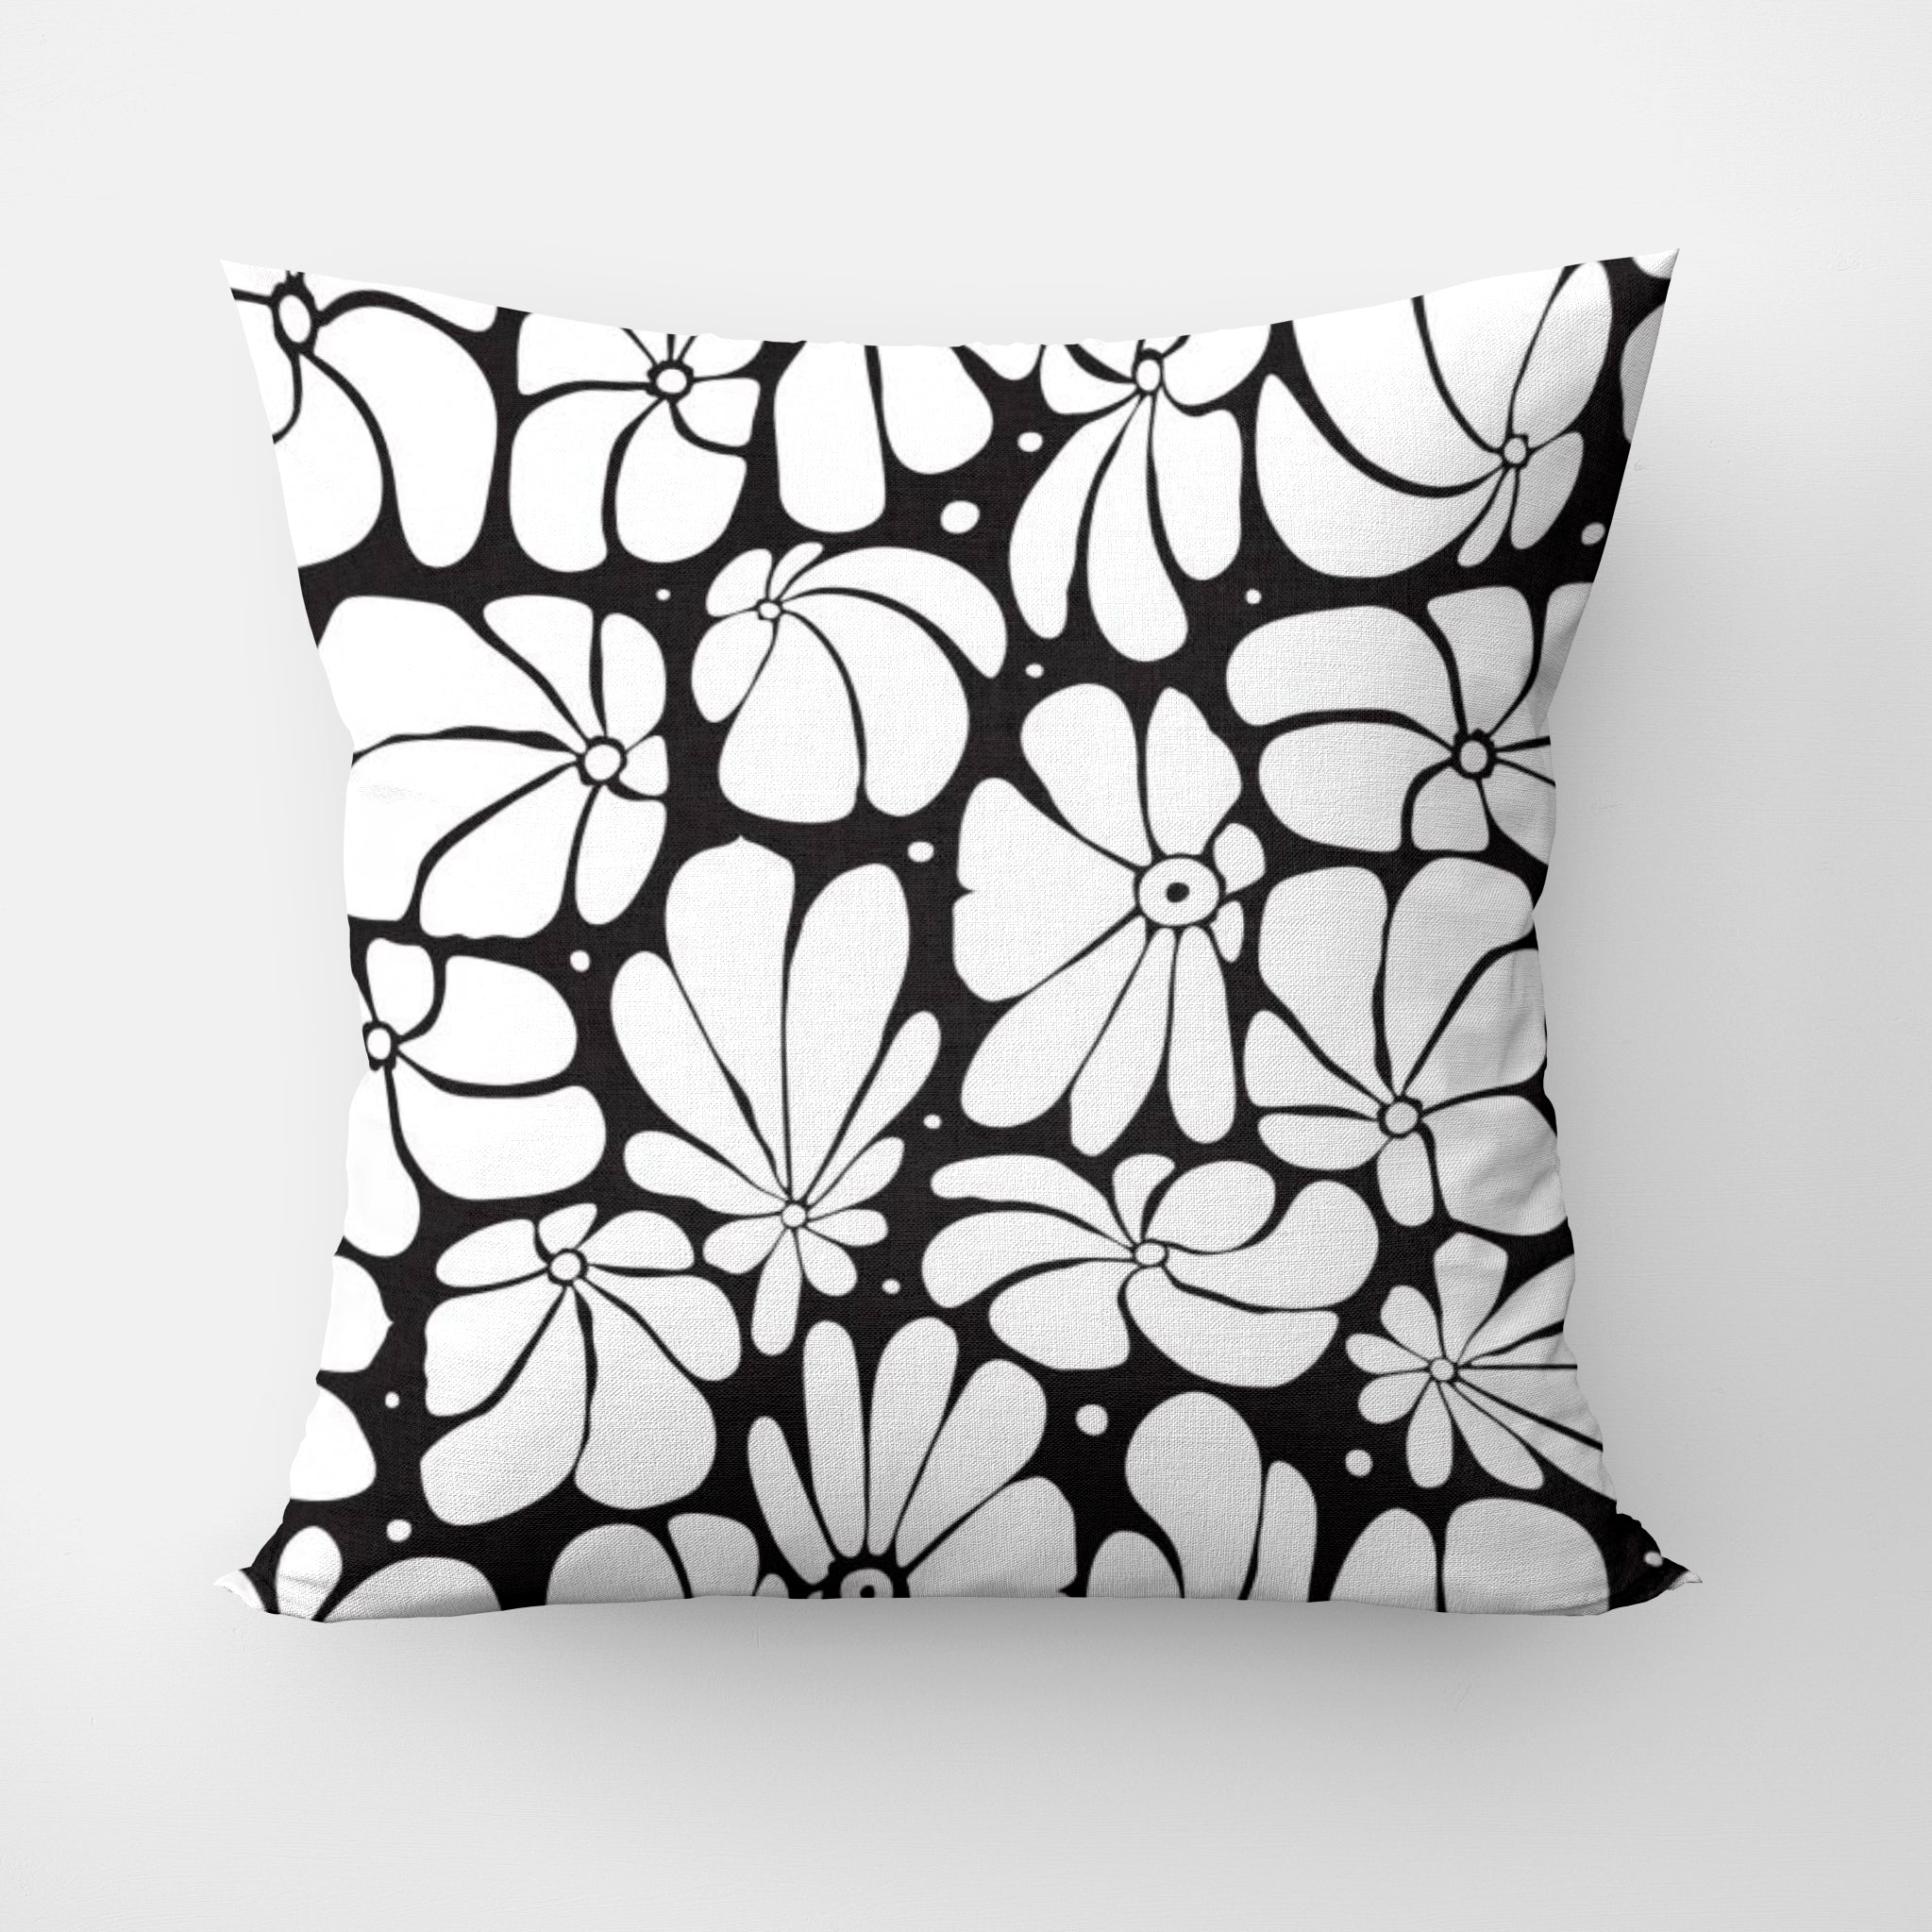 Abstract Black White Retro 70s Floral Throw Pillow Cover BLOSSOM